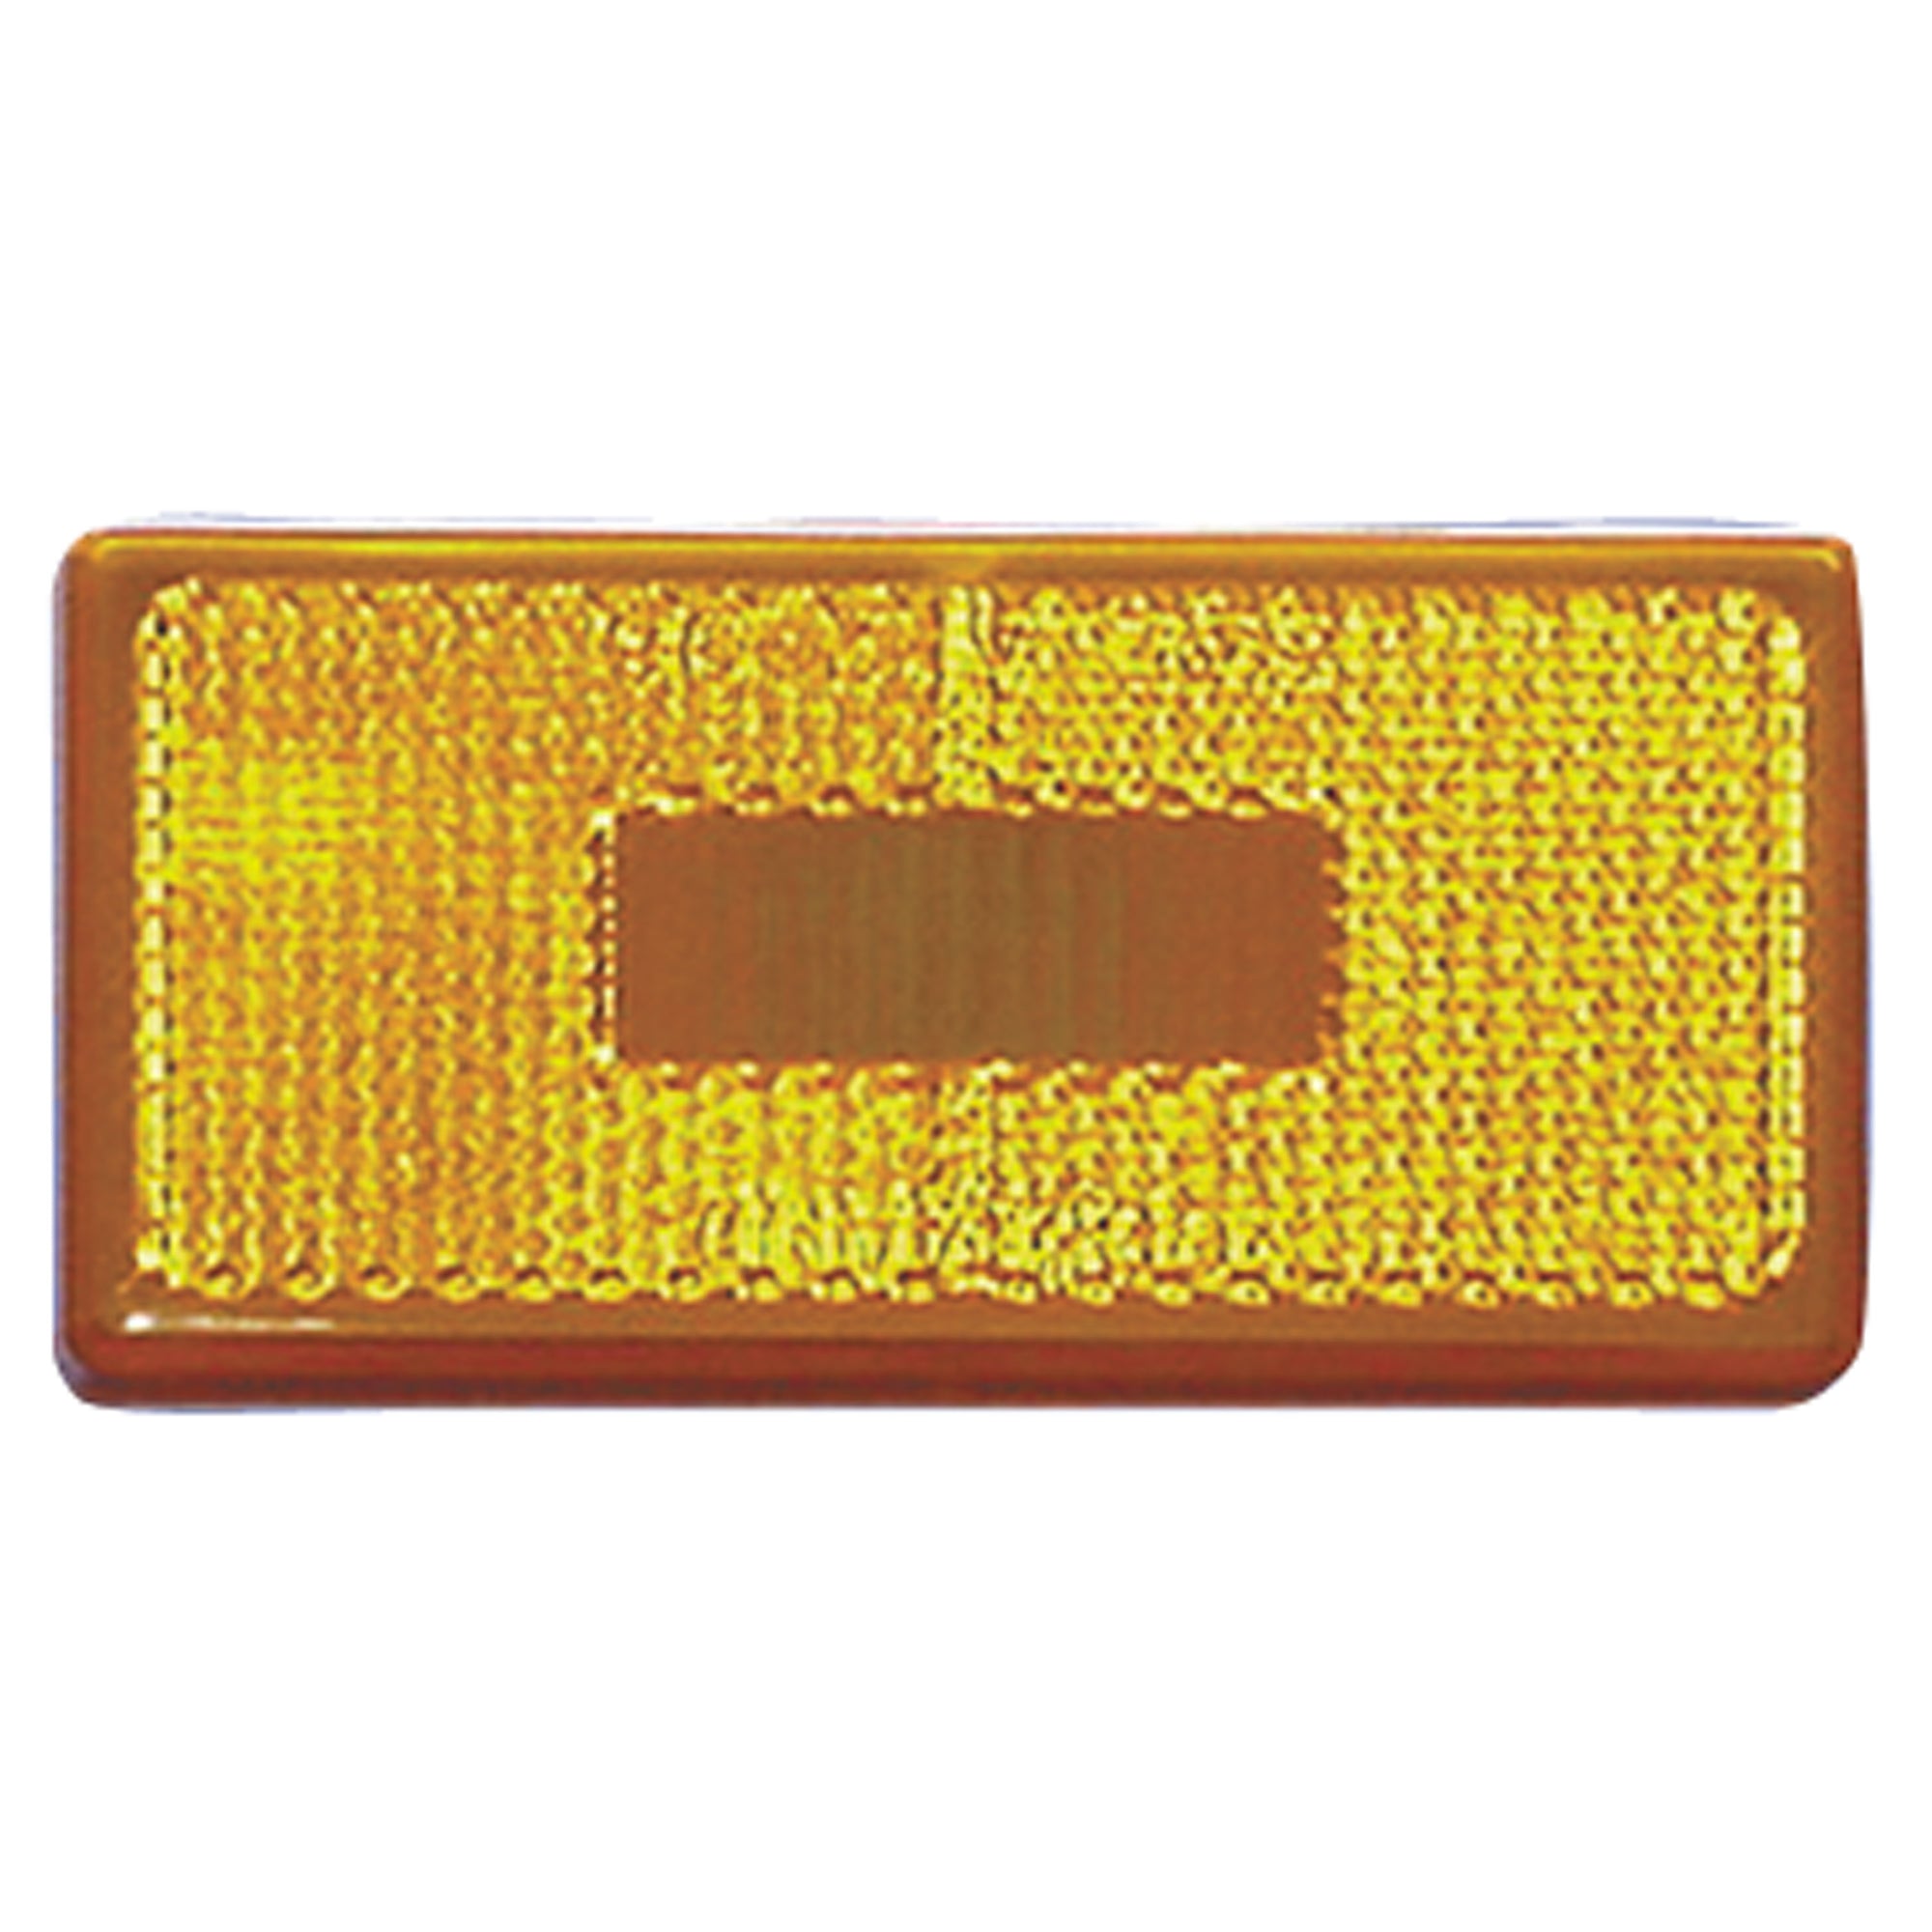 Fasteners Unlimited 003-55 Command Electronics Clearance Light - Amber Light